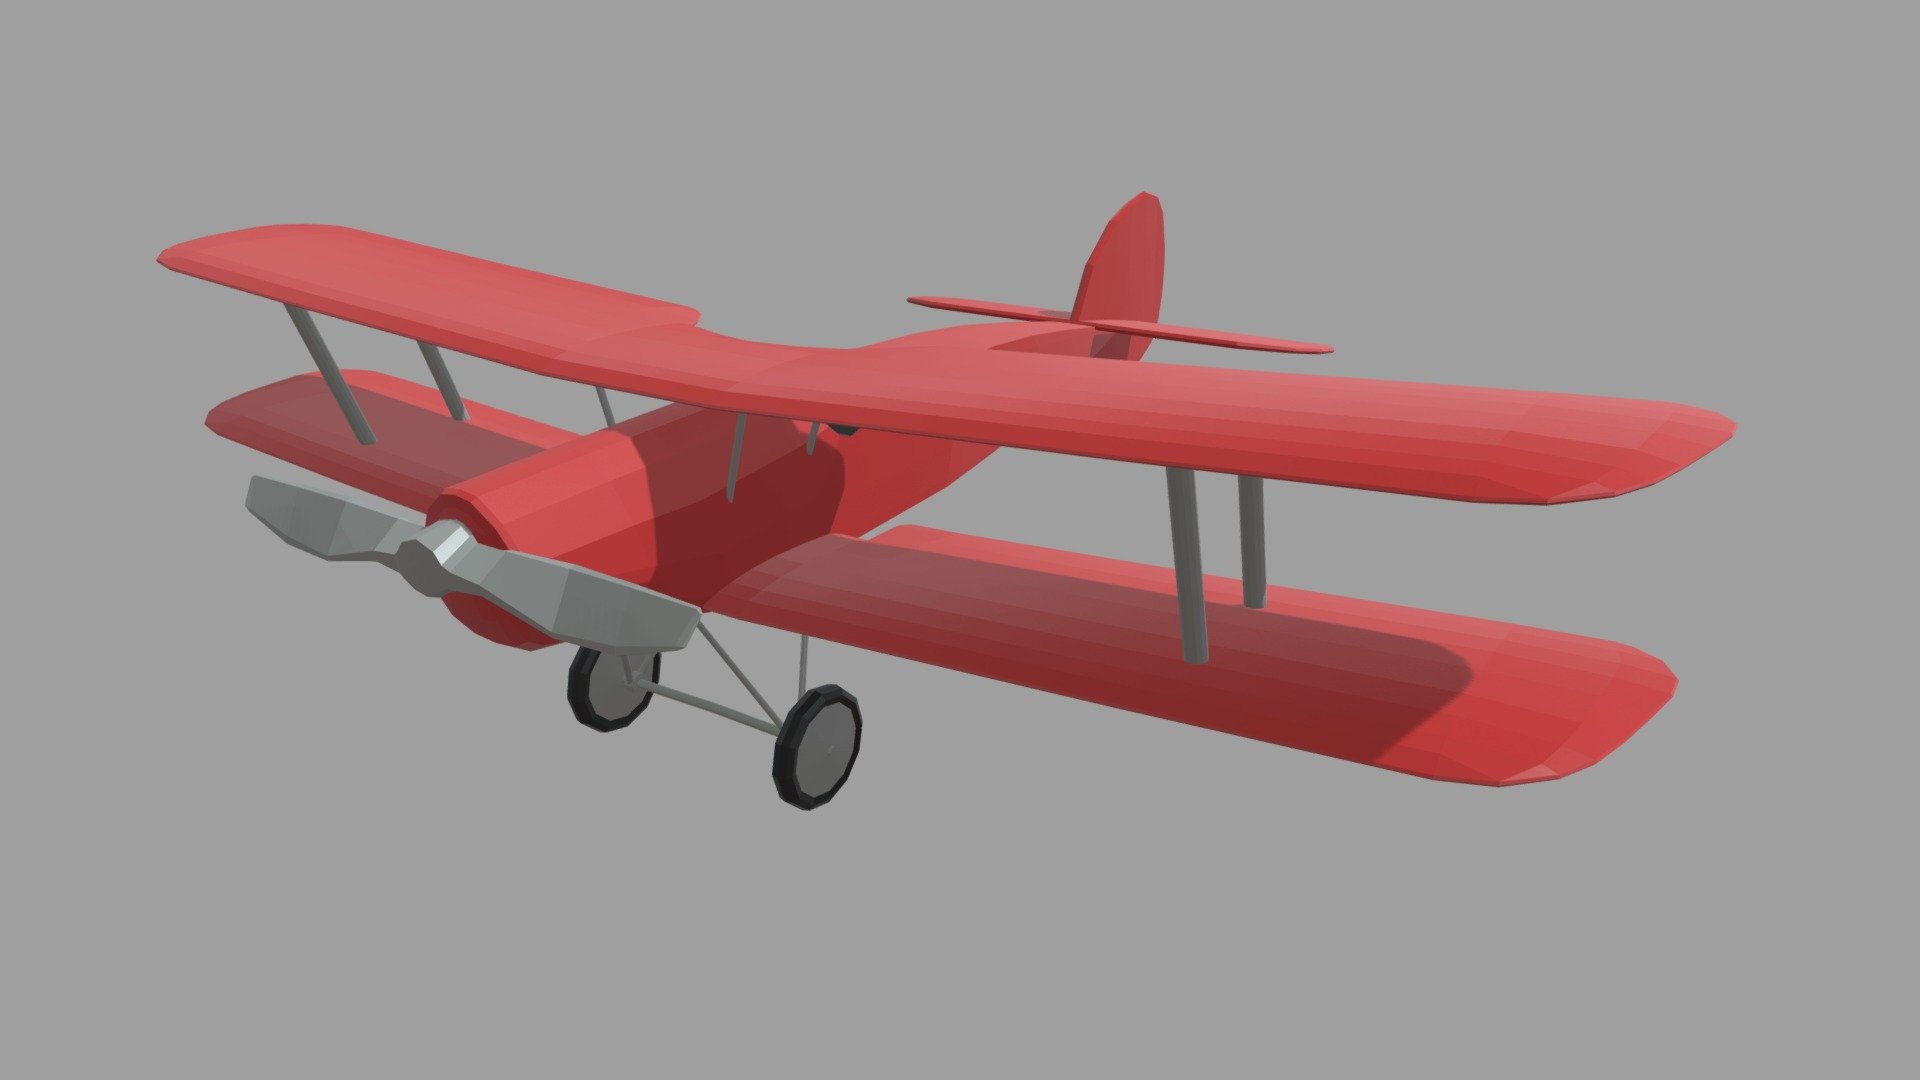 This model contains a Low Poly Plane 02 based on a boat which i modeled in Maya 2018. This model is perfect to create a new great scene with different low poly cars or low poly vehicles. I will add a low poly vehicles pack soon on my profile.

There is an automatic UV and one unique UV with a substance painter file added.

Tris: 3298 // Verts: 1689

The model is ready as one unique part and ready for being a great CGI model and also a 3D printable model, i will add the STL model, tested for 3D printing in Ultimaker Cura. I uploaded the model in .mb, ,blend, .stl, .obj and .fbx. as well as the subtance painter file.

If you need any kind of help contact me, i will help you with everything i can. If you like the model please give me some feedback, I would appreciate it.

Don’t doubt on contacting me, i would be very happy to help. If you experience any kind of difficulties, be sure to contact me and i will help you. Sincerely Yours, ViperJr3D - Low Poly Plane 02 - Buy Royalty Free 3D model by ViperJr3D 3d model